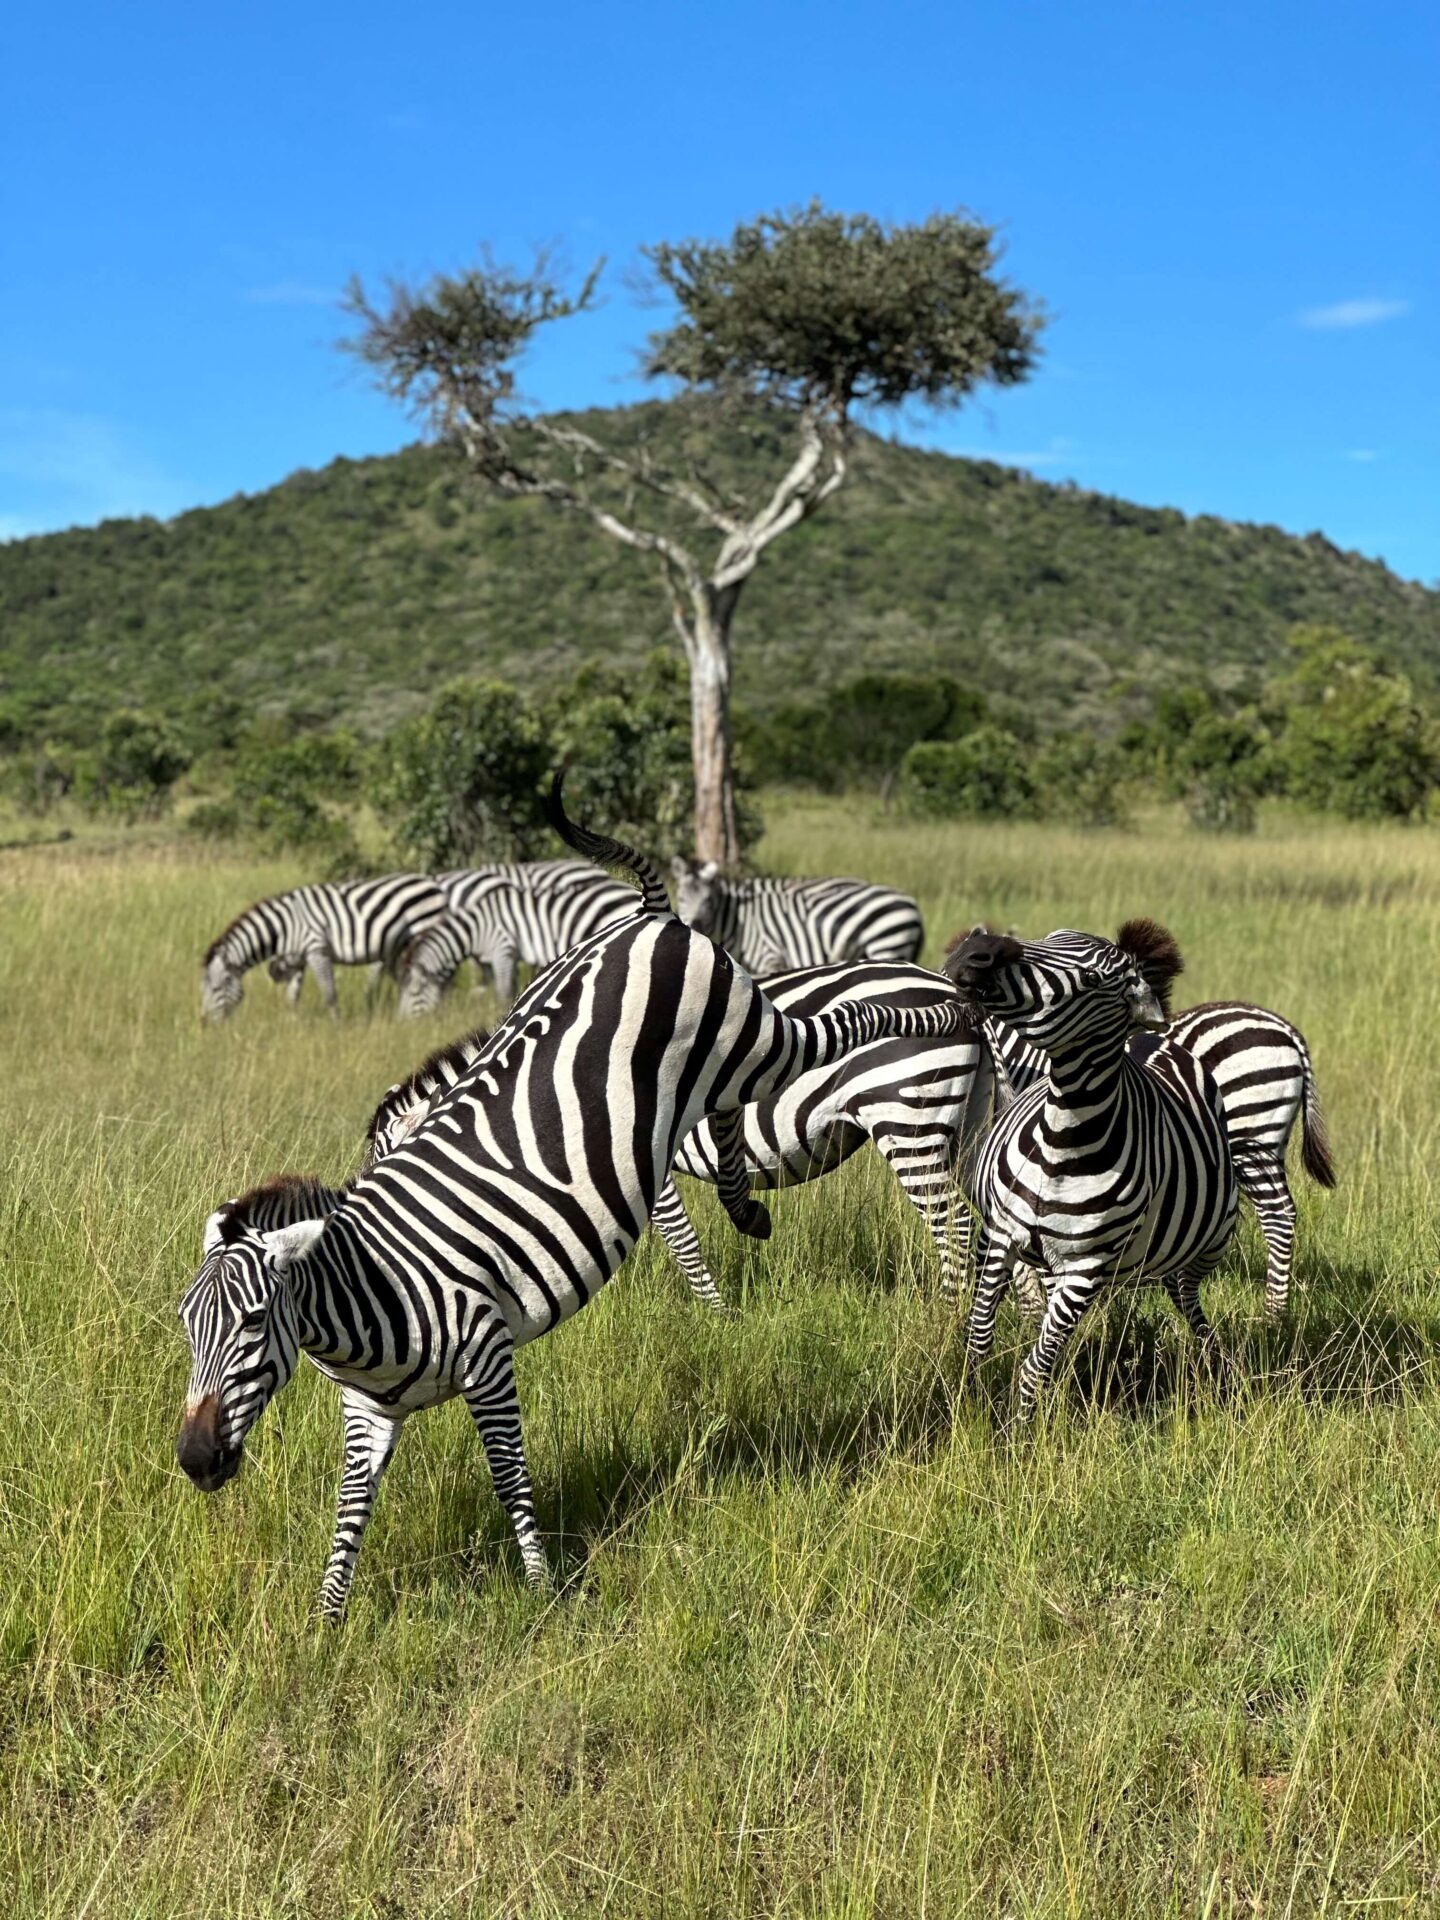 A group of zebras in the wild. One zebra is kicking another in the face.